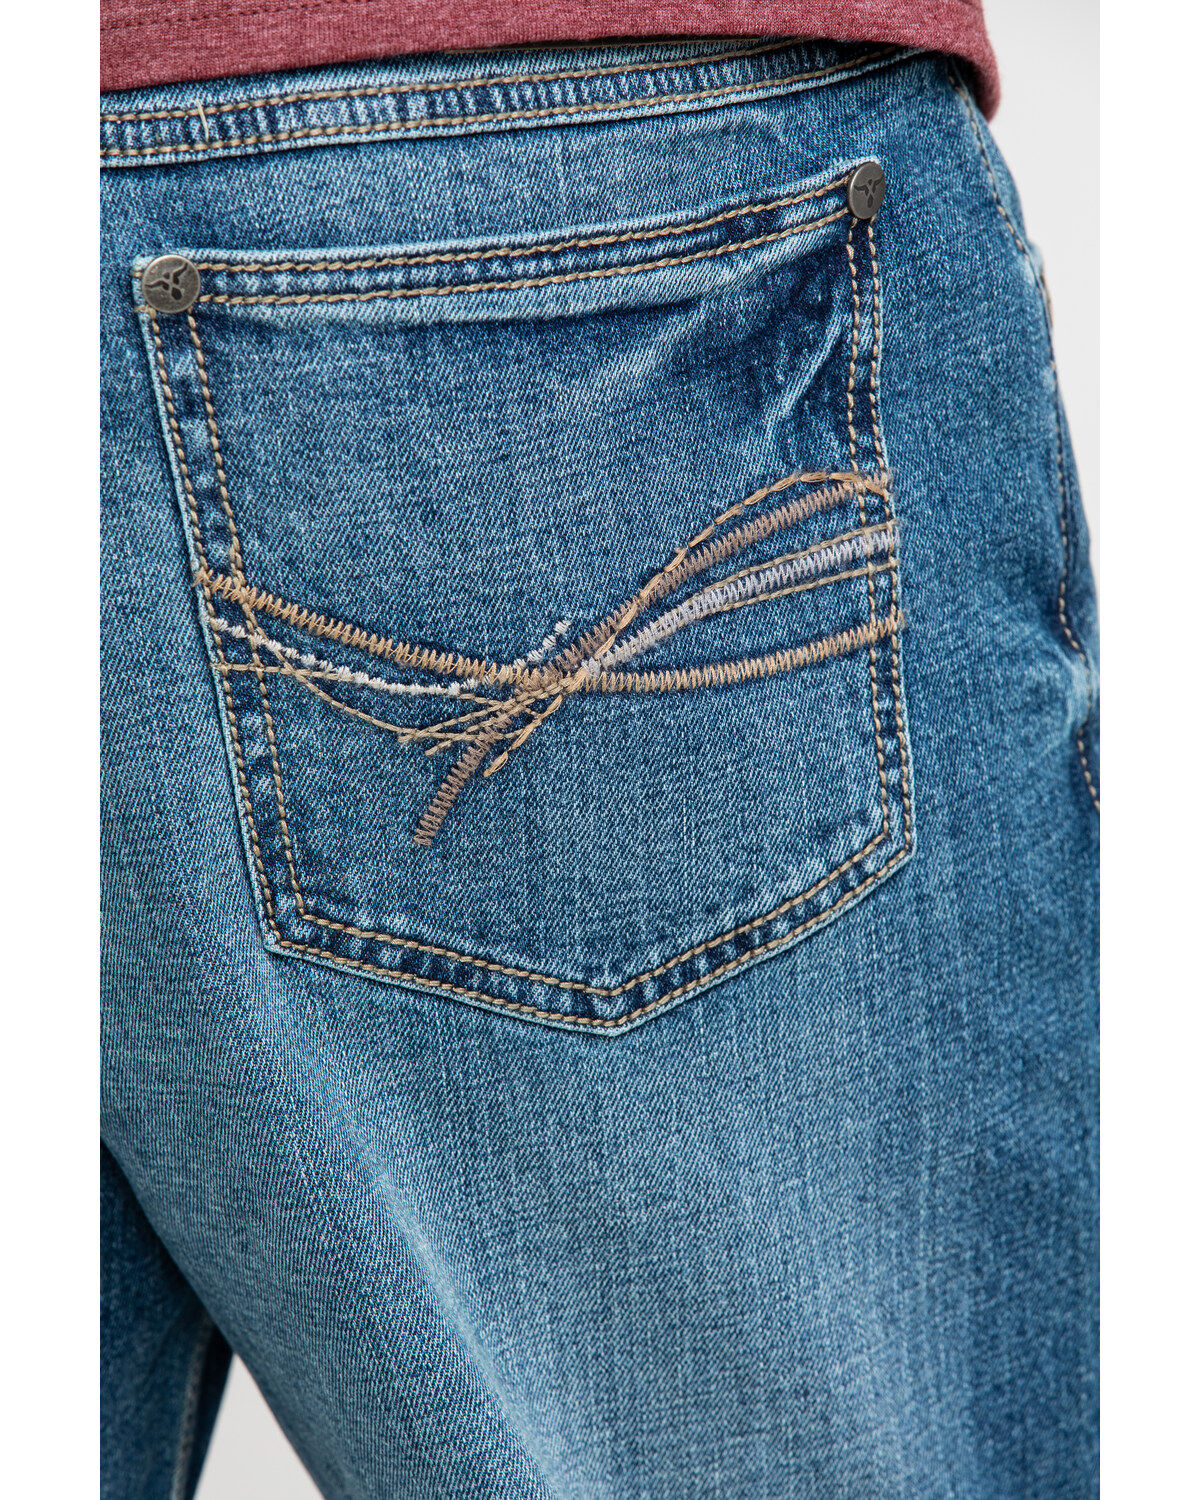 wrangler 20x extreme relaxed fit jeans